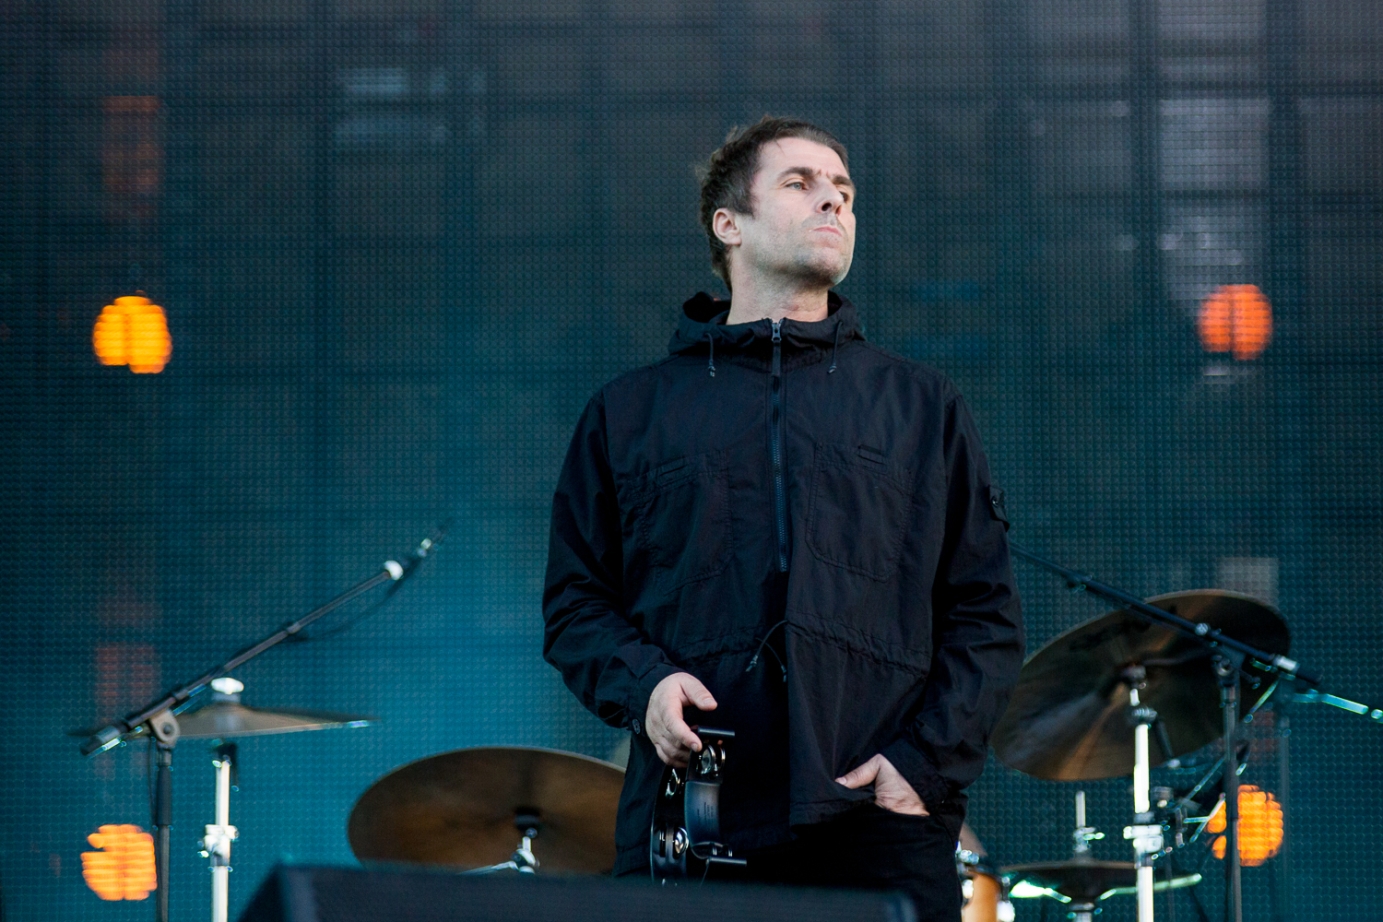 Live photography for Liam Gallagher by Michelle Roberts